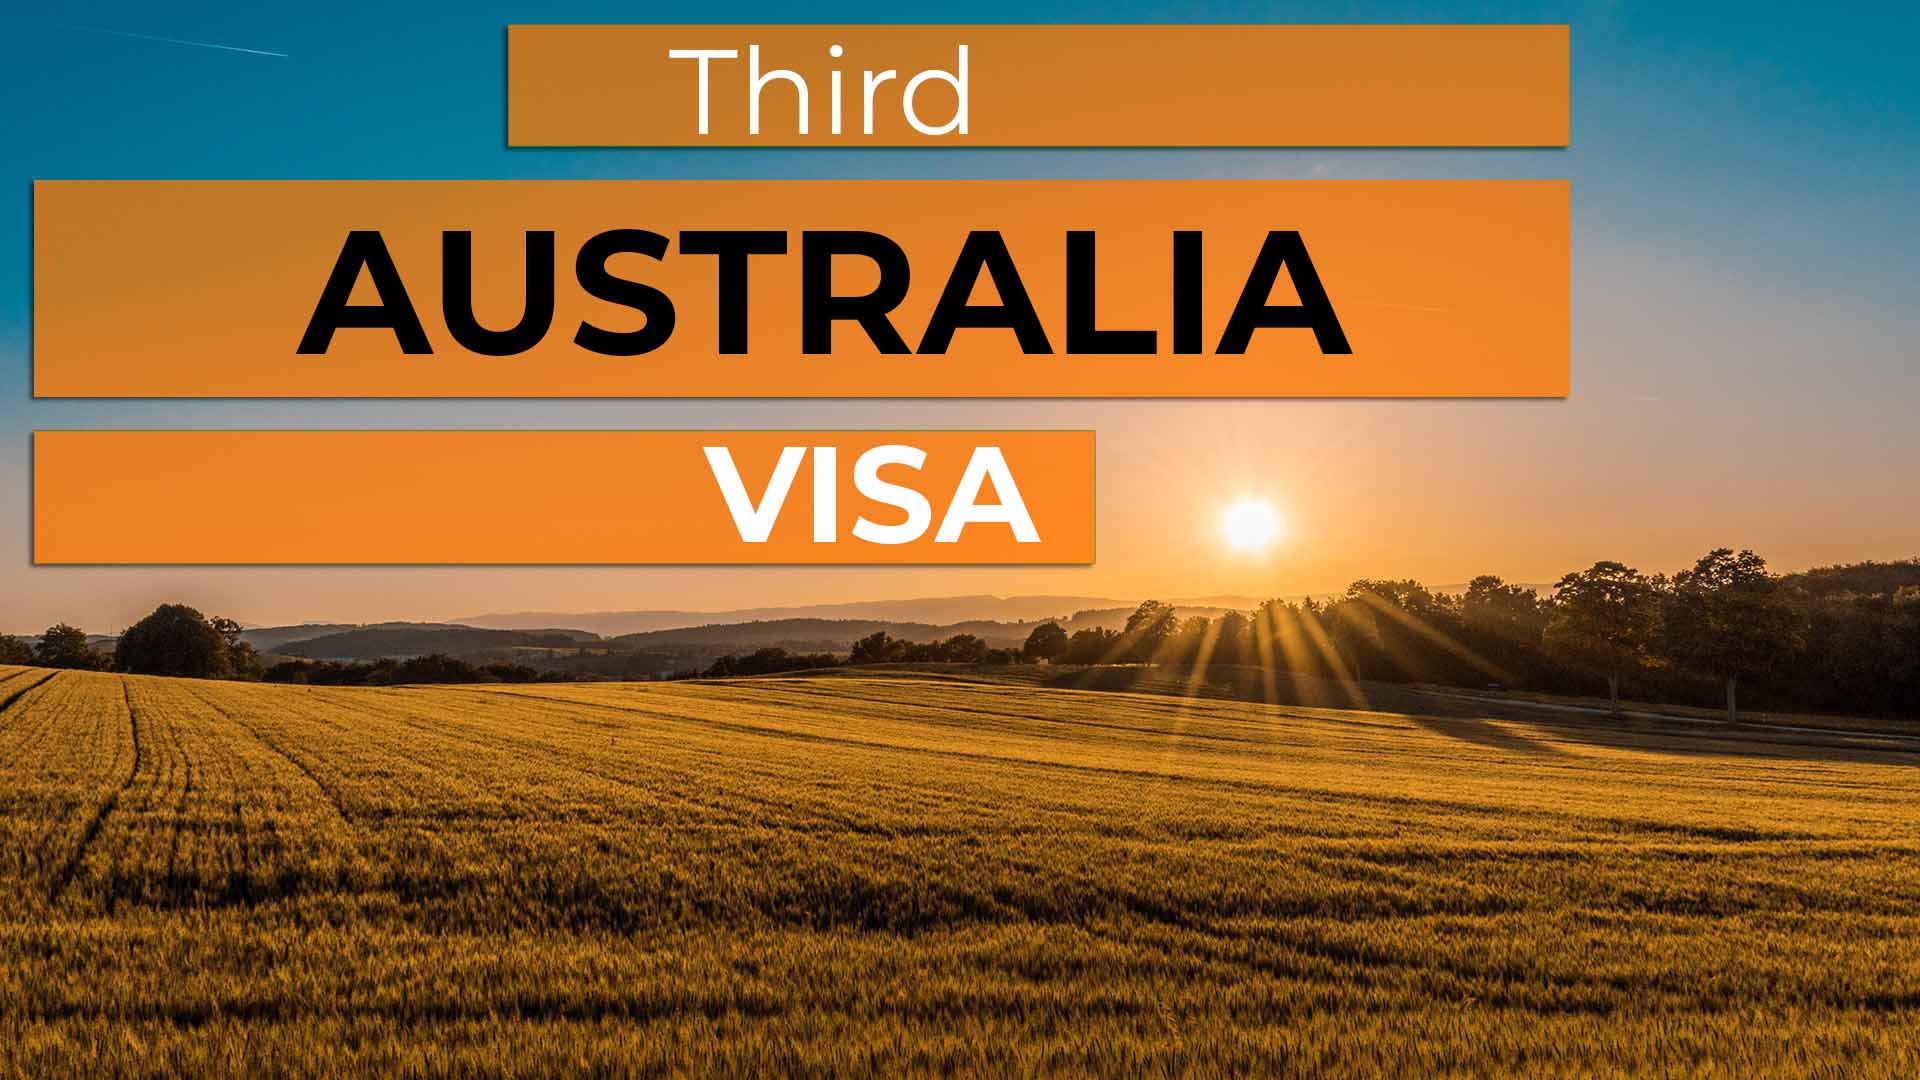 All the information you need for your Third Working Holiday Visa to Australia